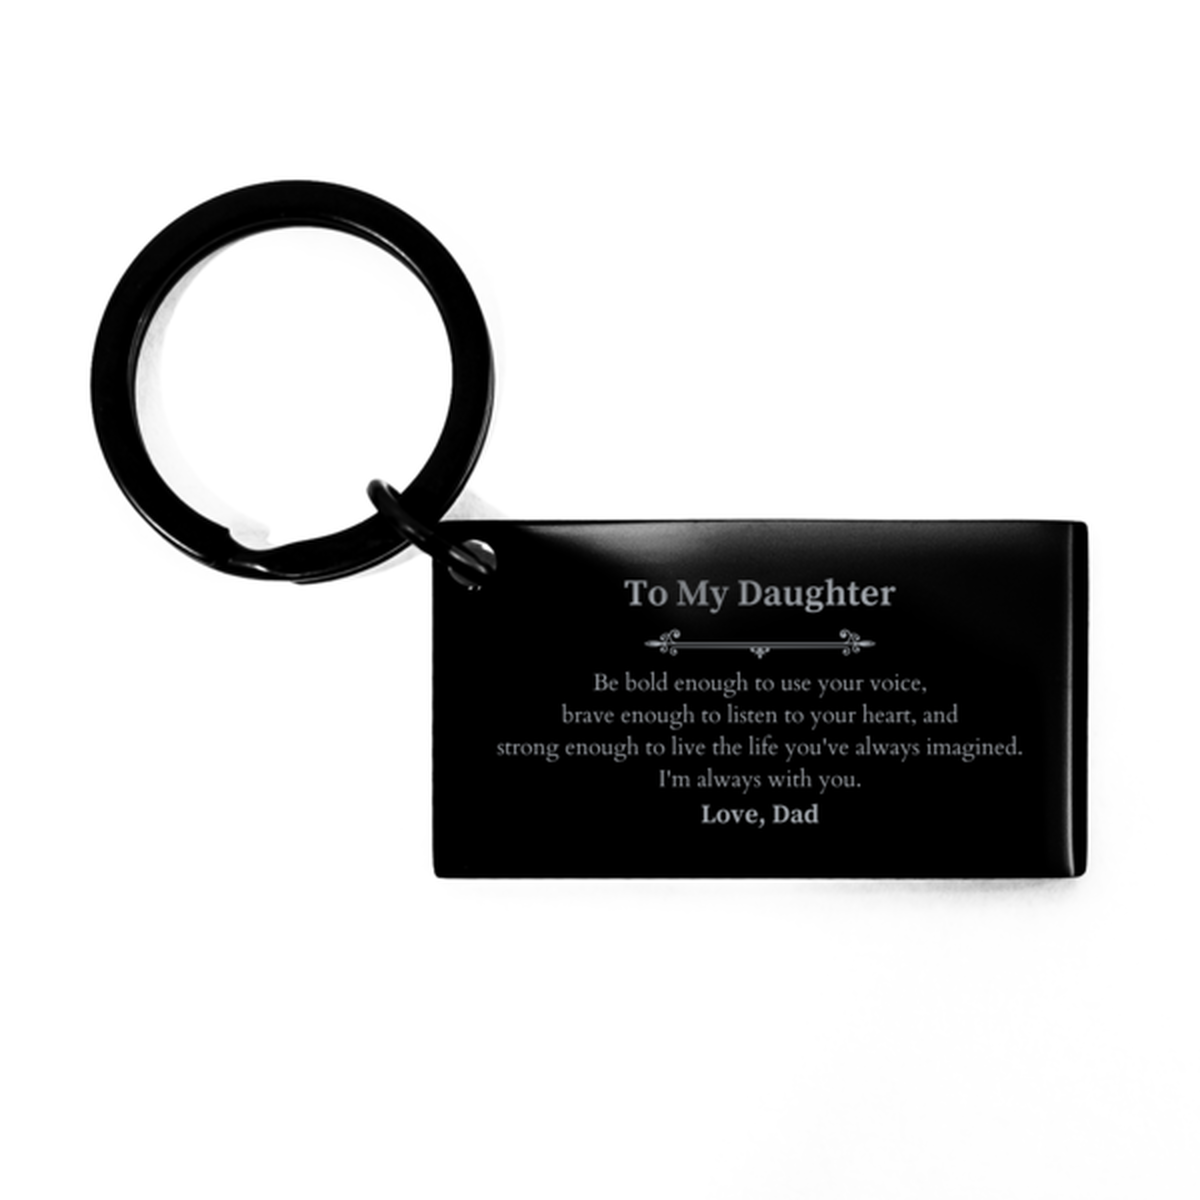 Keepsake Daughter Keychain Gift Idea Graduation Christmas Birthday Daughter from Dad, Daughter Be bold enough to use your voice, brave enough to listen to your heart. Love, Dad